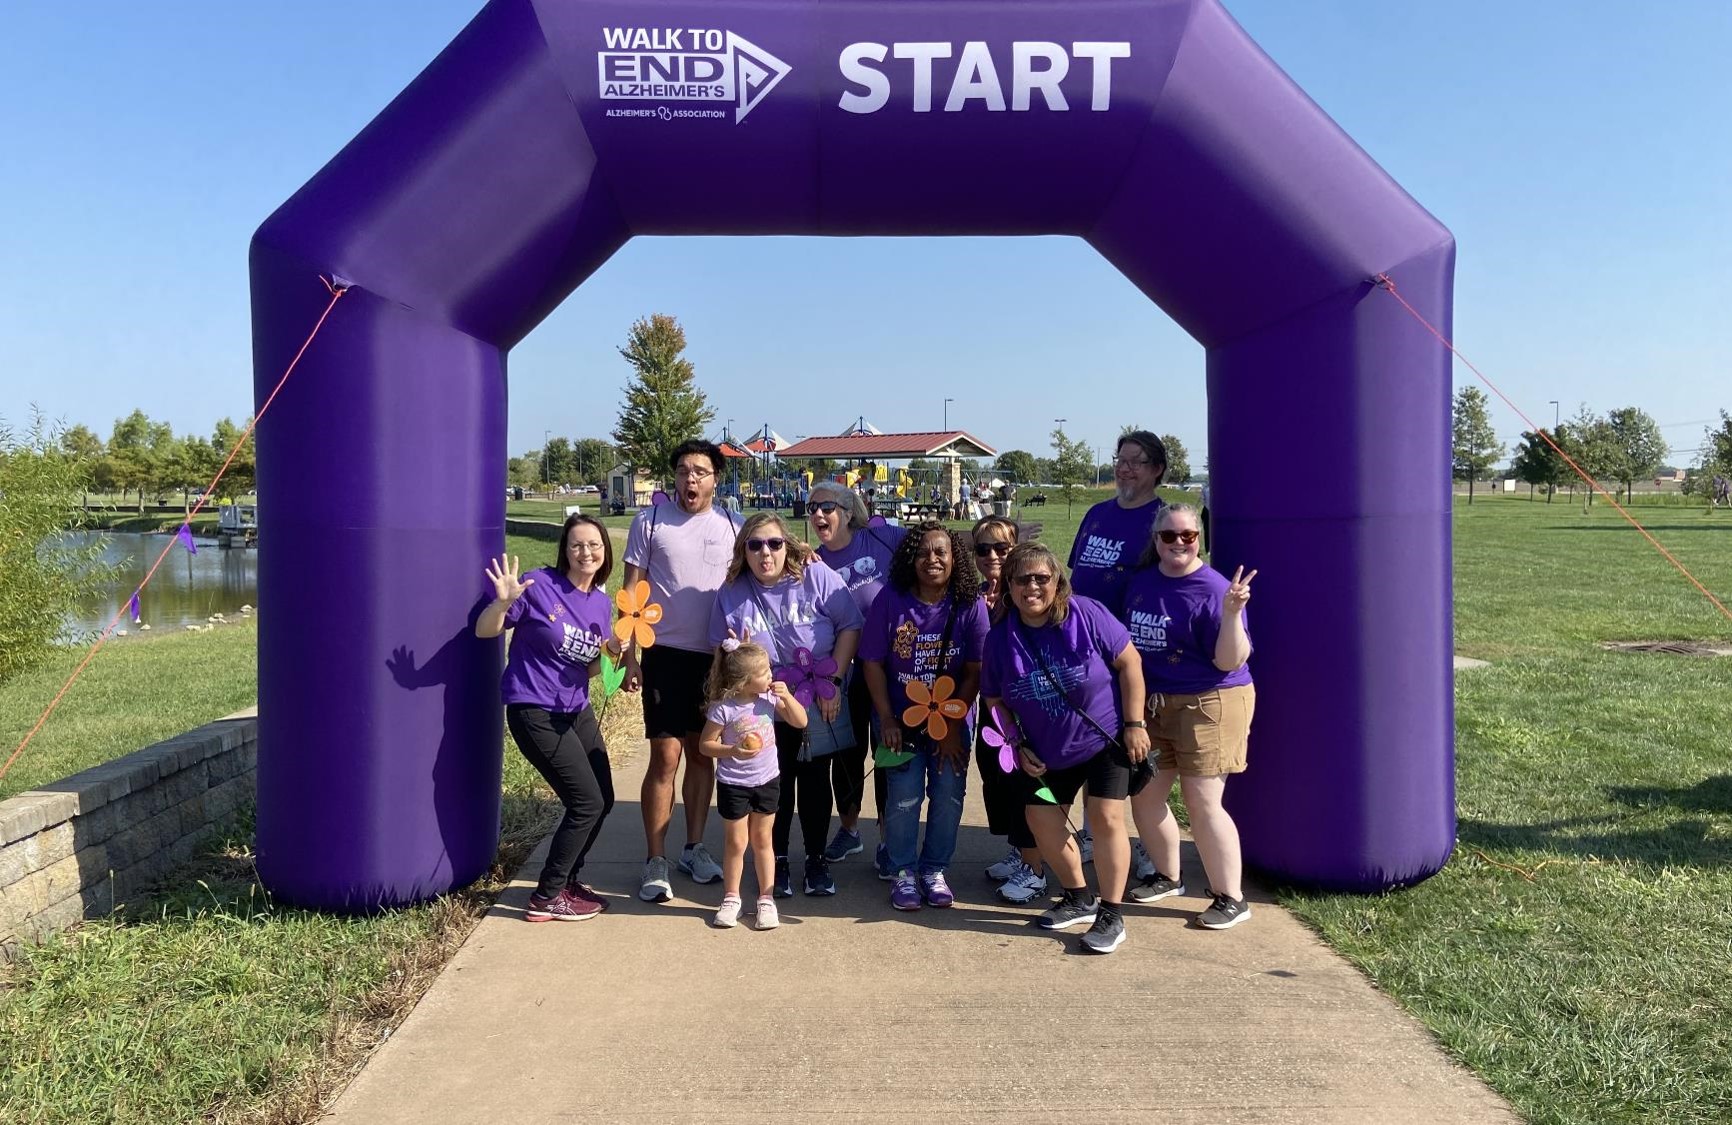 Team Loggers poses for a funny photo at the Walk to End Alzheimer’s start line. L to R: Leslie Johnson, DeAngelo Thompson, Kassie Thompson, EllianaThompson, Bobbi Henry, Laurie Clemons, Karen Sanders, Marina Wirsing, Kirk Yenerall, and Carley Young. 